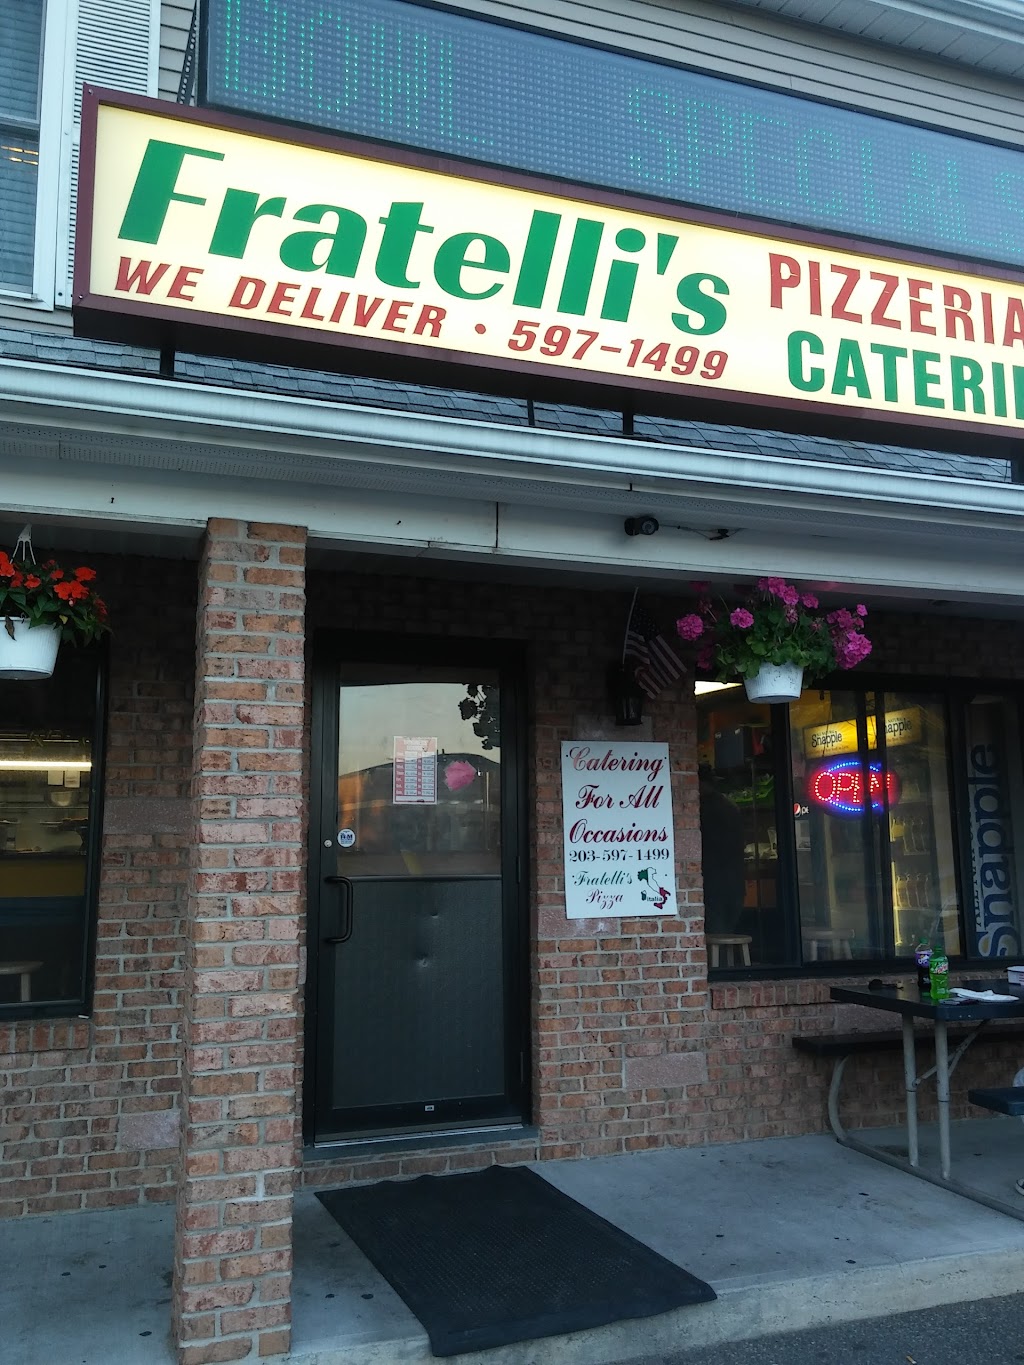 Fratellis Pizzeria & Catering | 689 Hill St, Waterbury, CT 06704 | Phone: (203) 597-1499